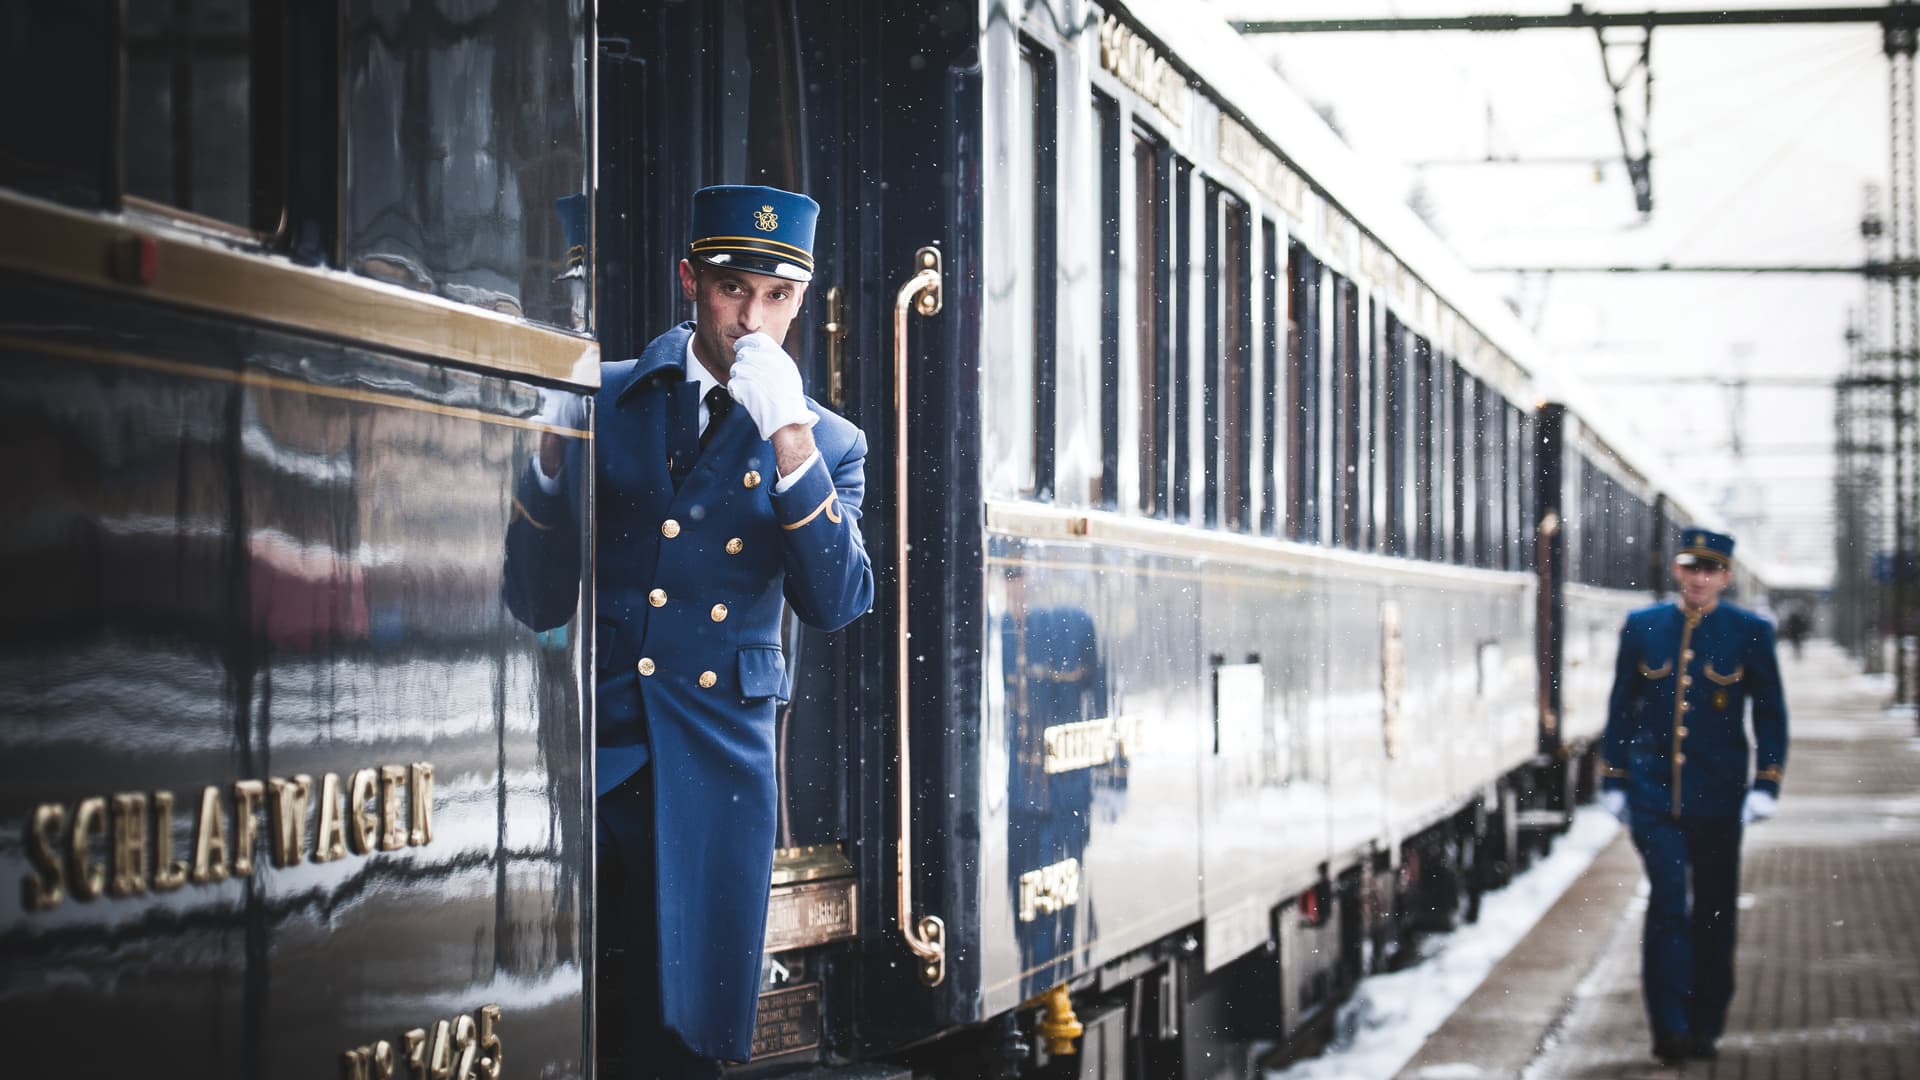 Two companies have luxury trains called the ‘Orient Express.’ Here are the diffe..